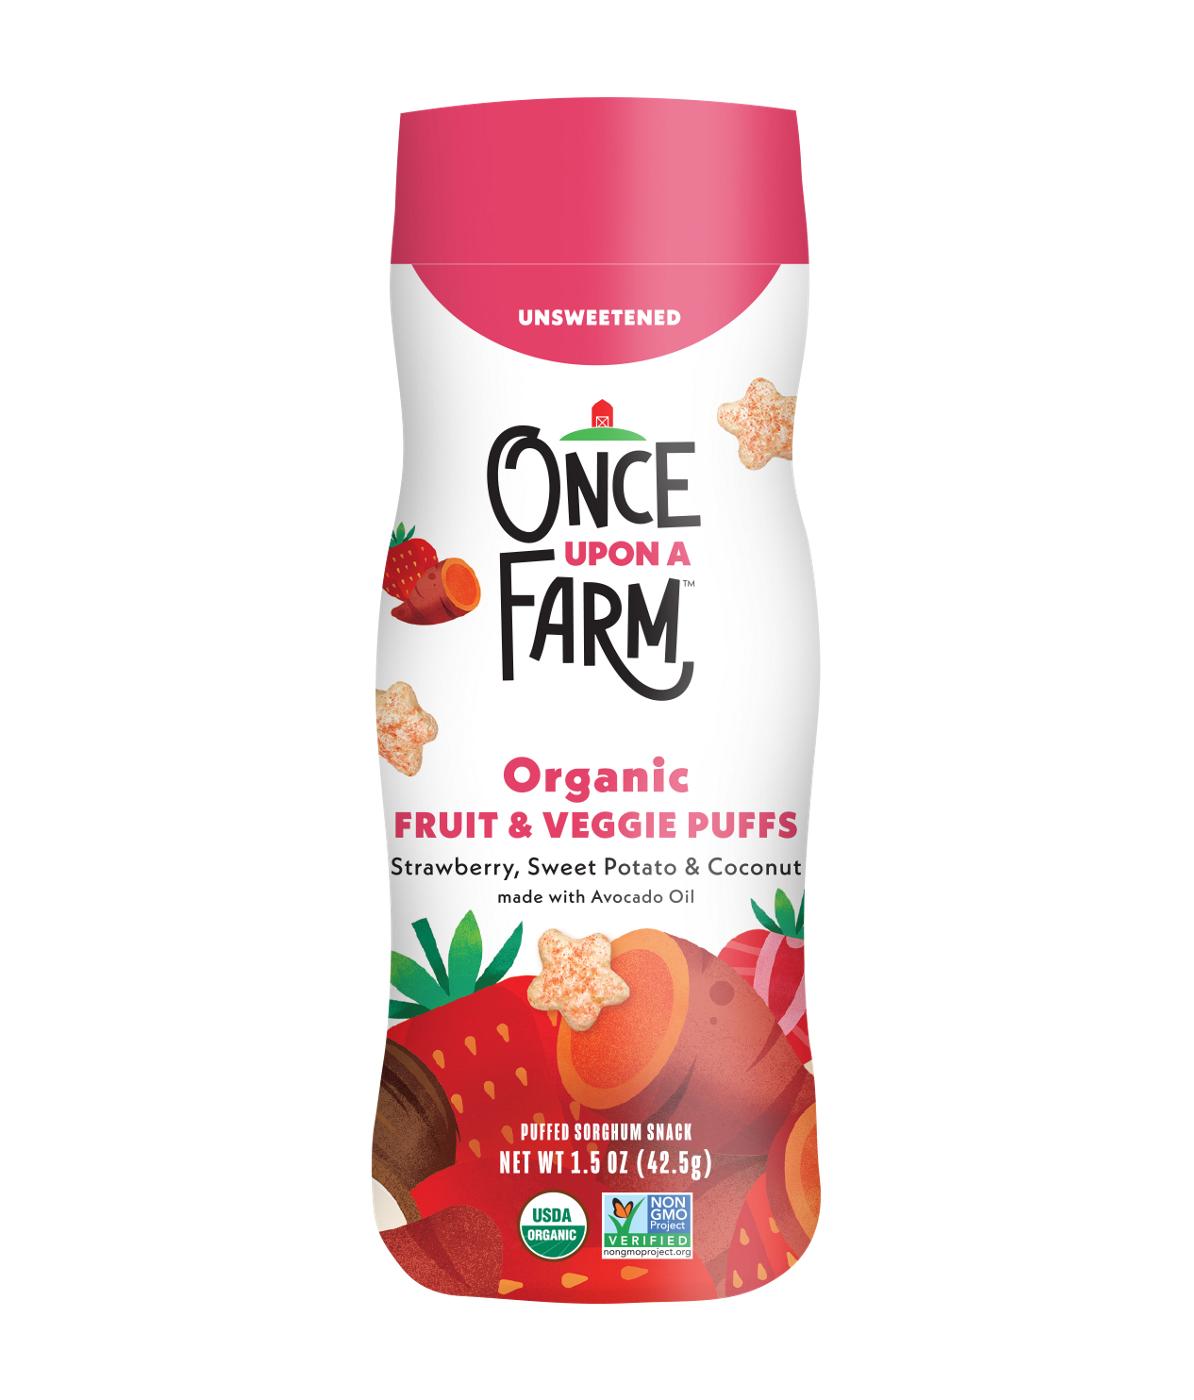 Once Upon a Farm Organic Fruit & Veggie Puffs - Strawberry, Sweet Potato & Coconut; image 1 of 3